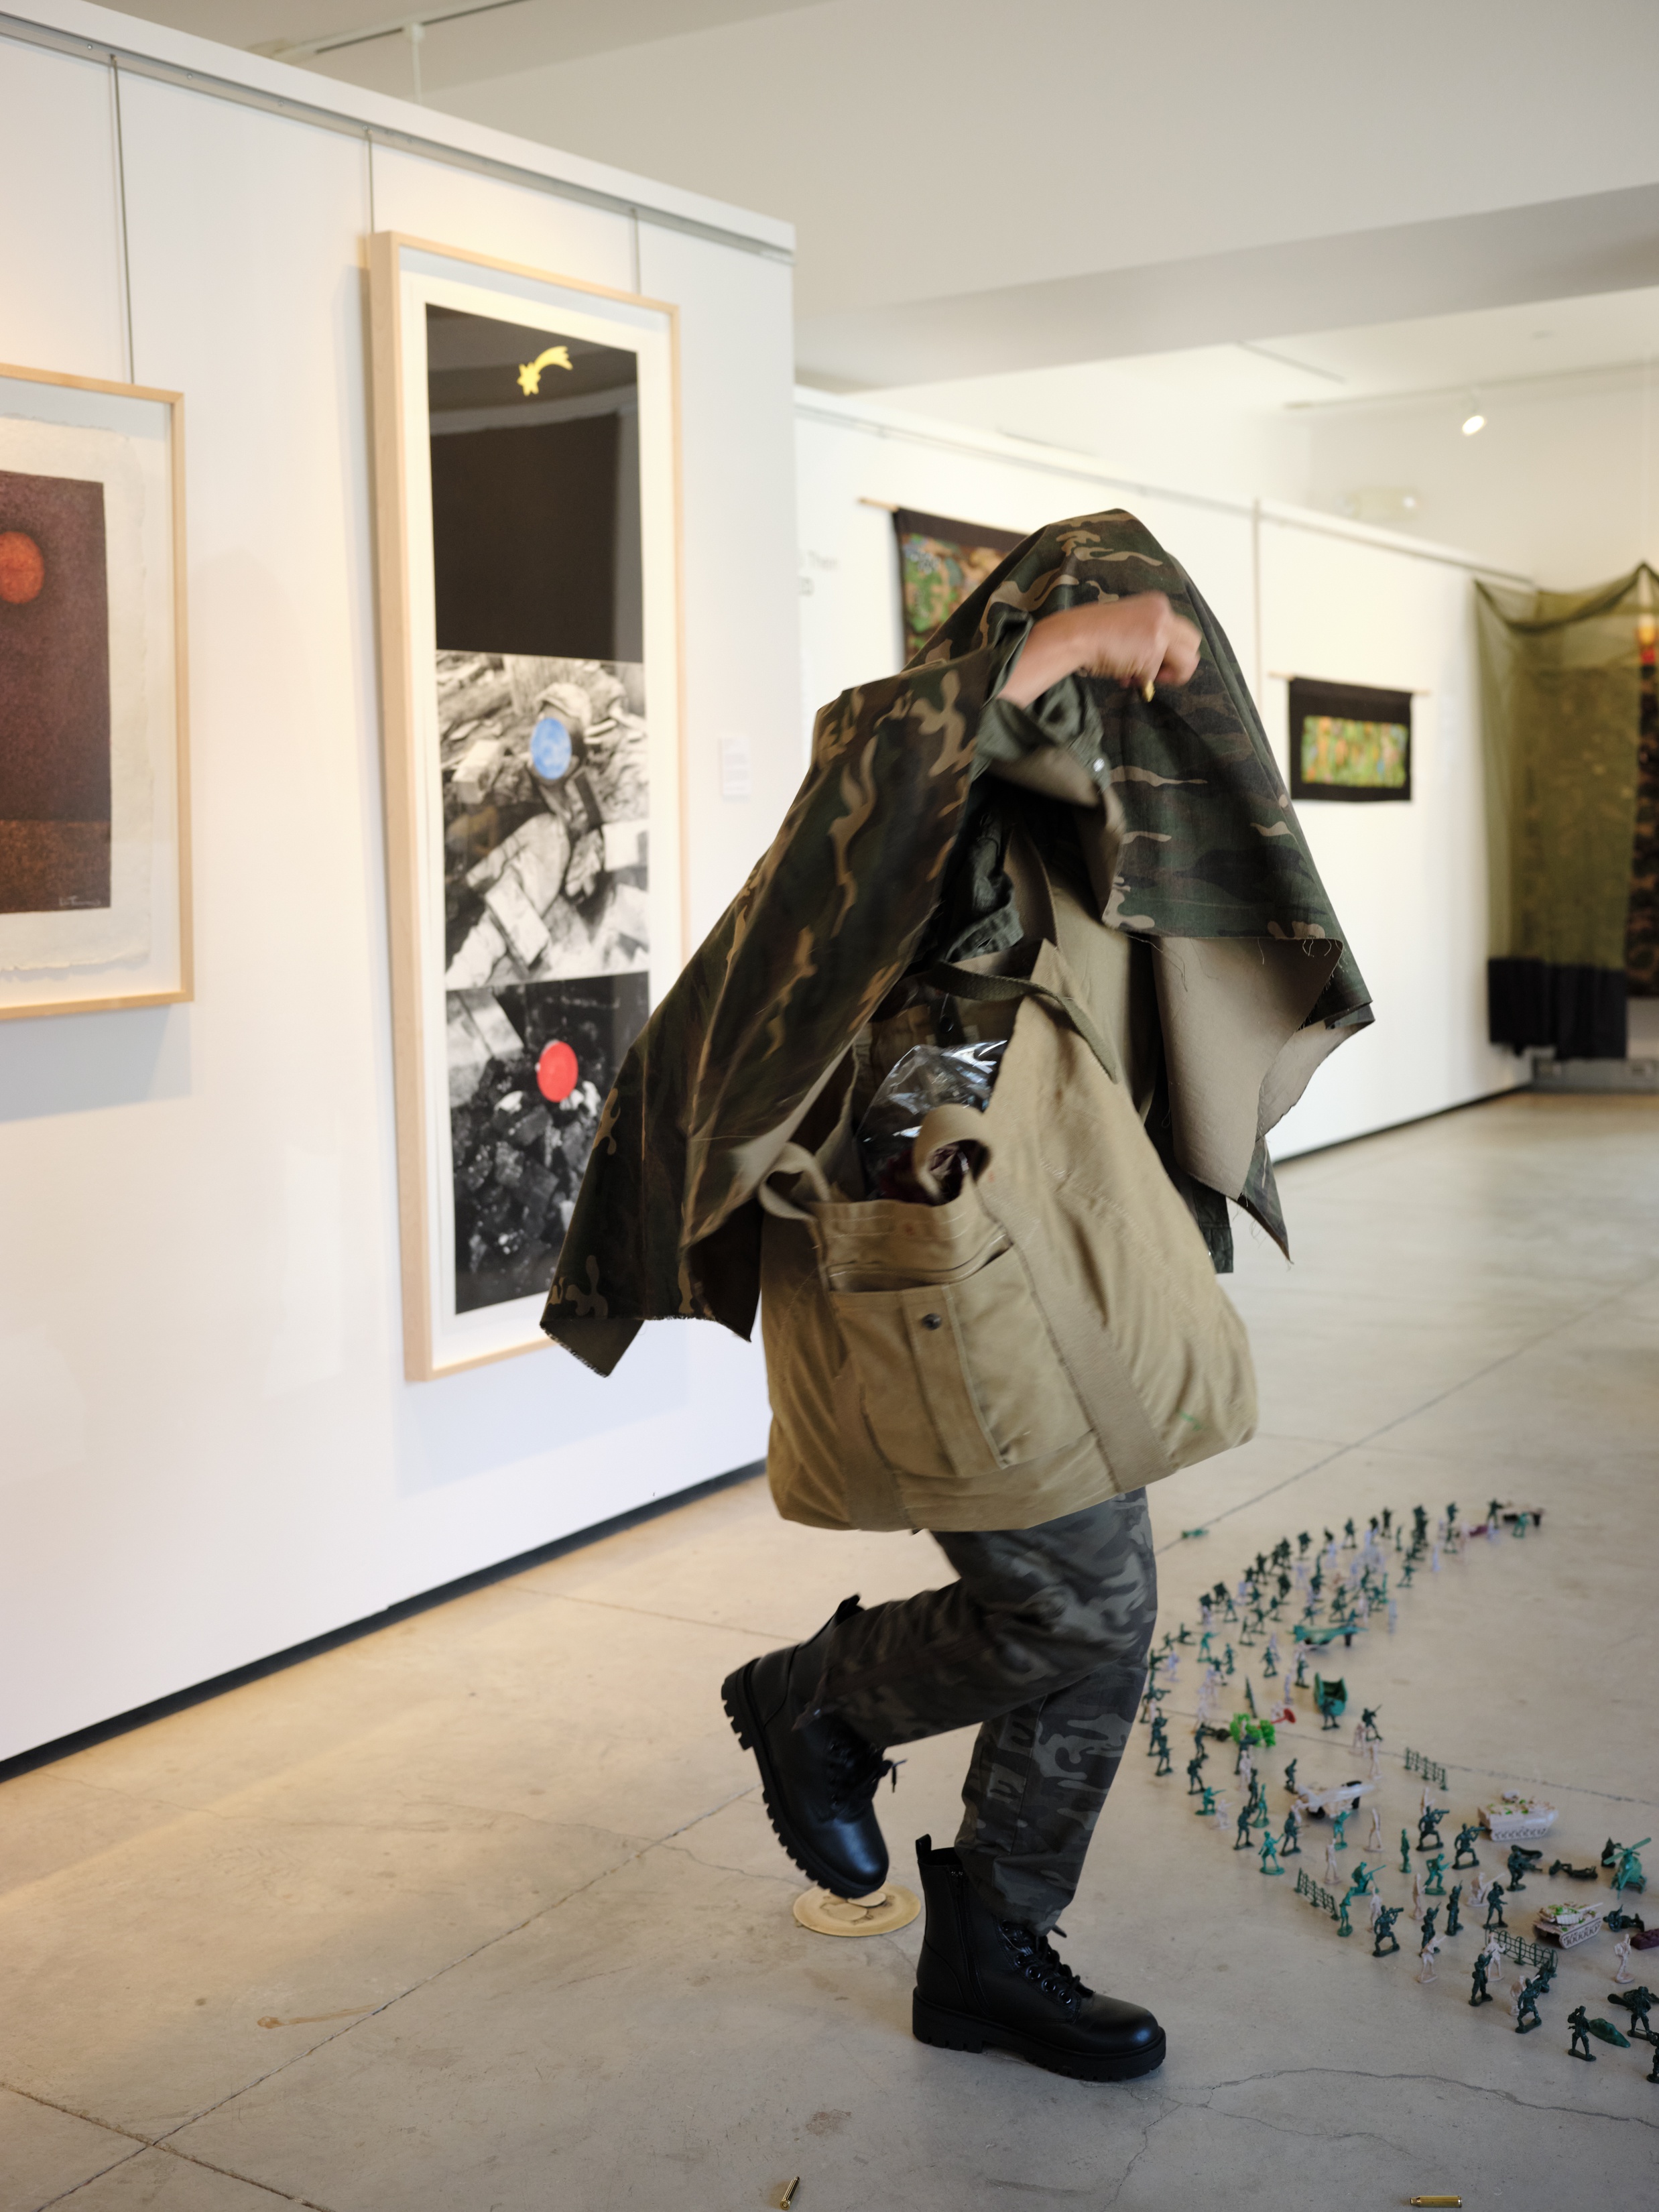 Artist shrouded in camouflage garb